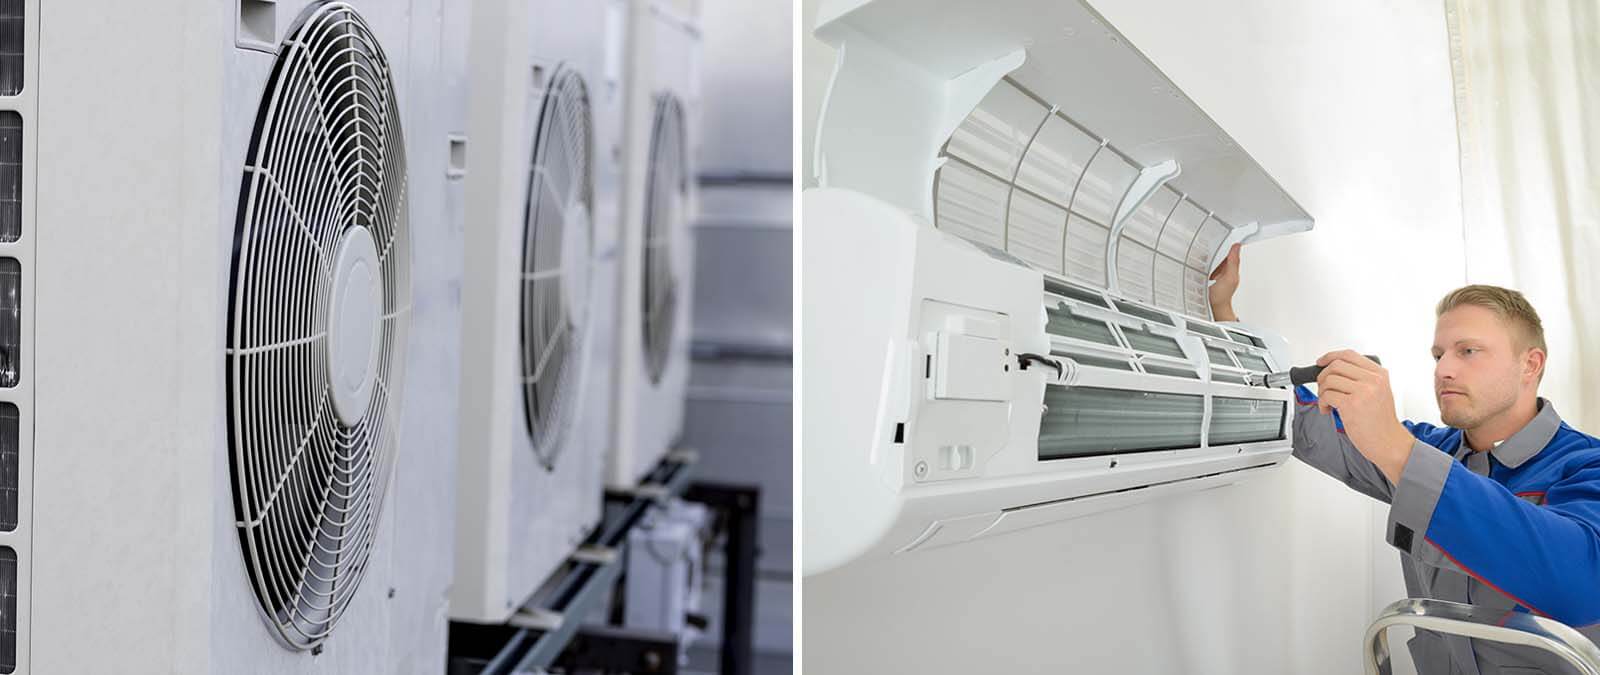 Need a reliable AC repair company? Call 262-534-7330 today!